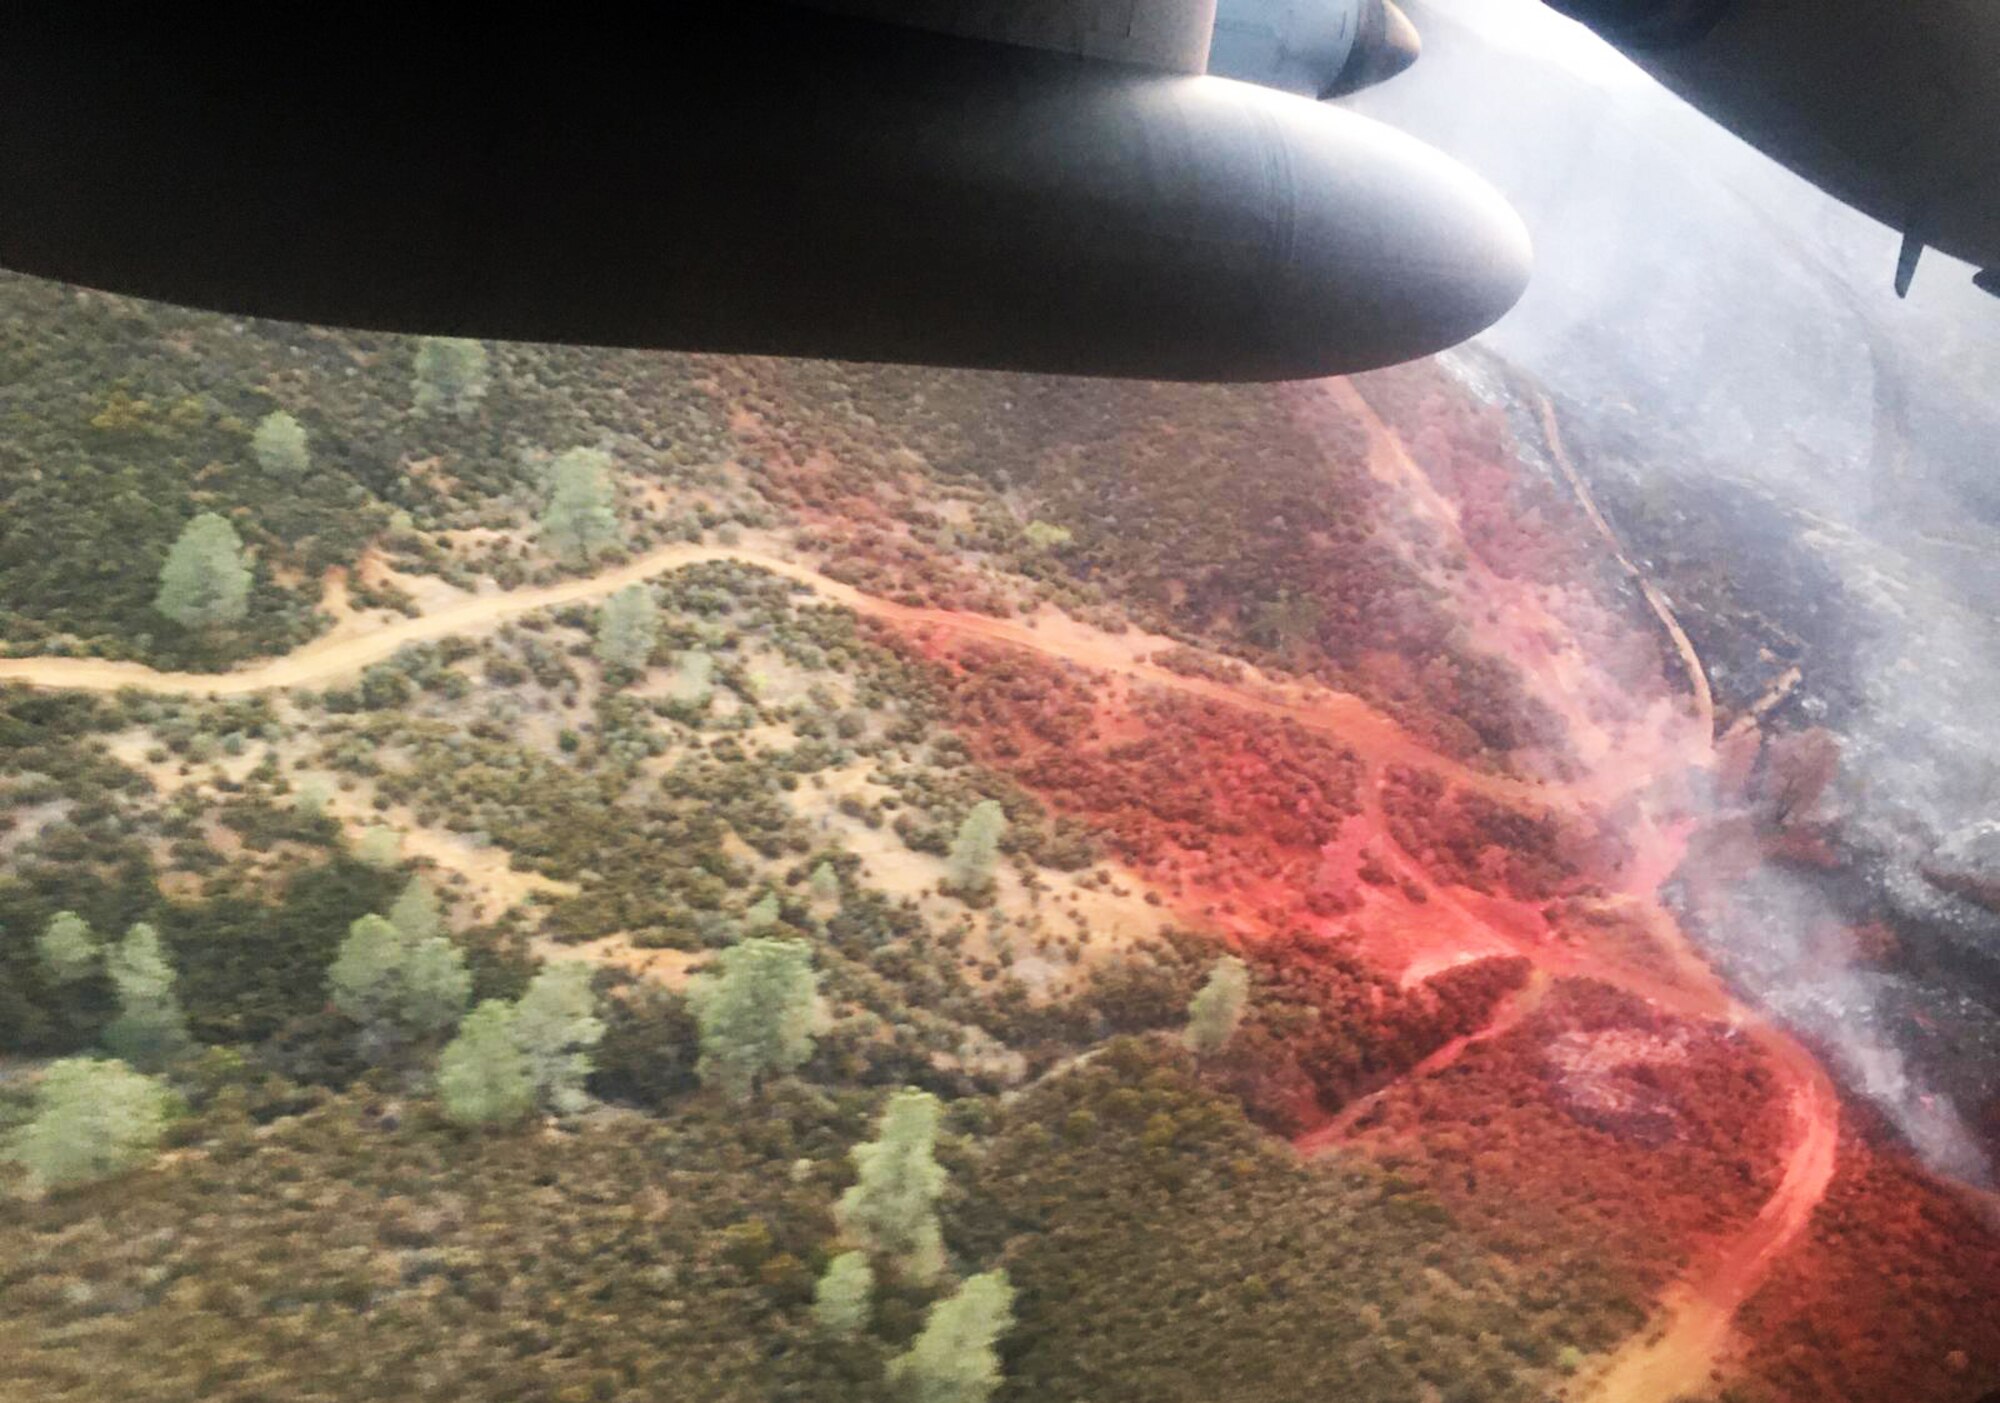 Large military aircraft flies over fires in California.